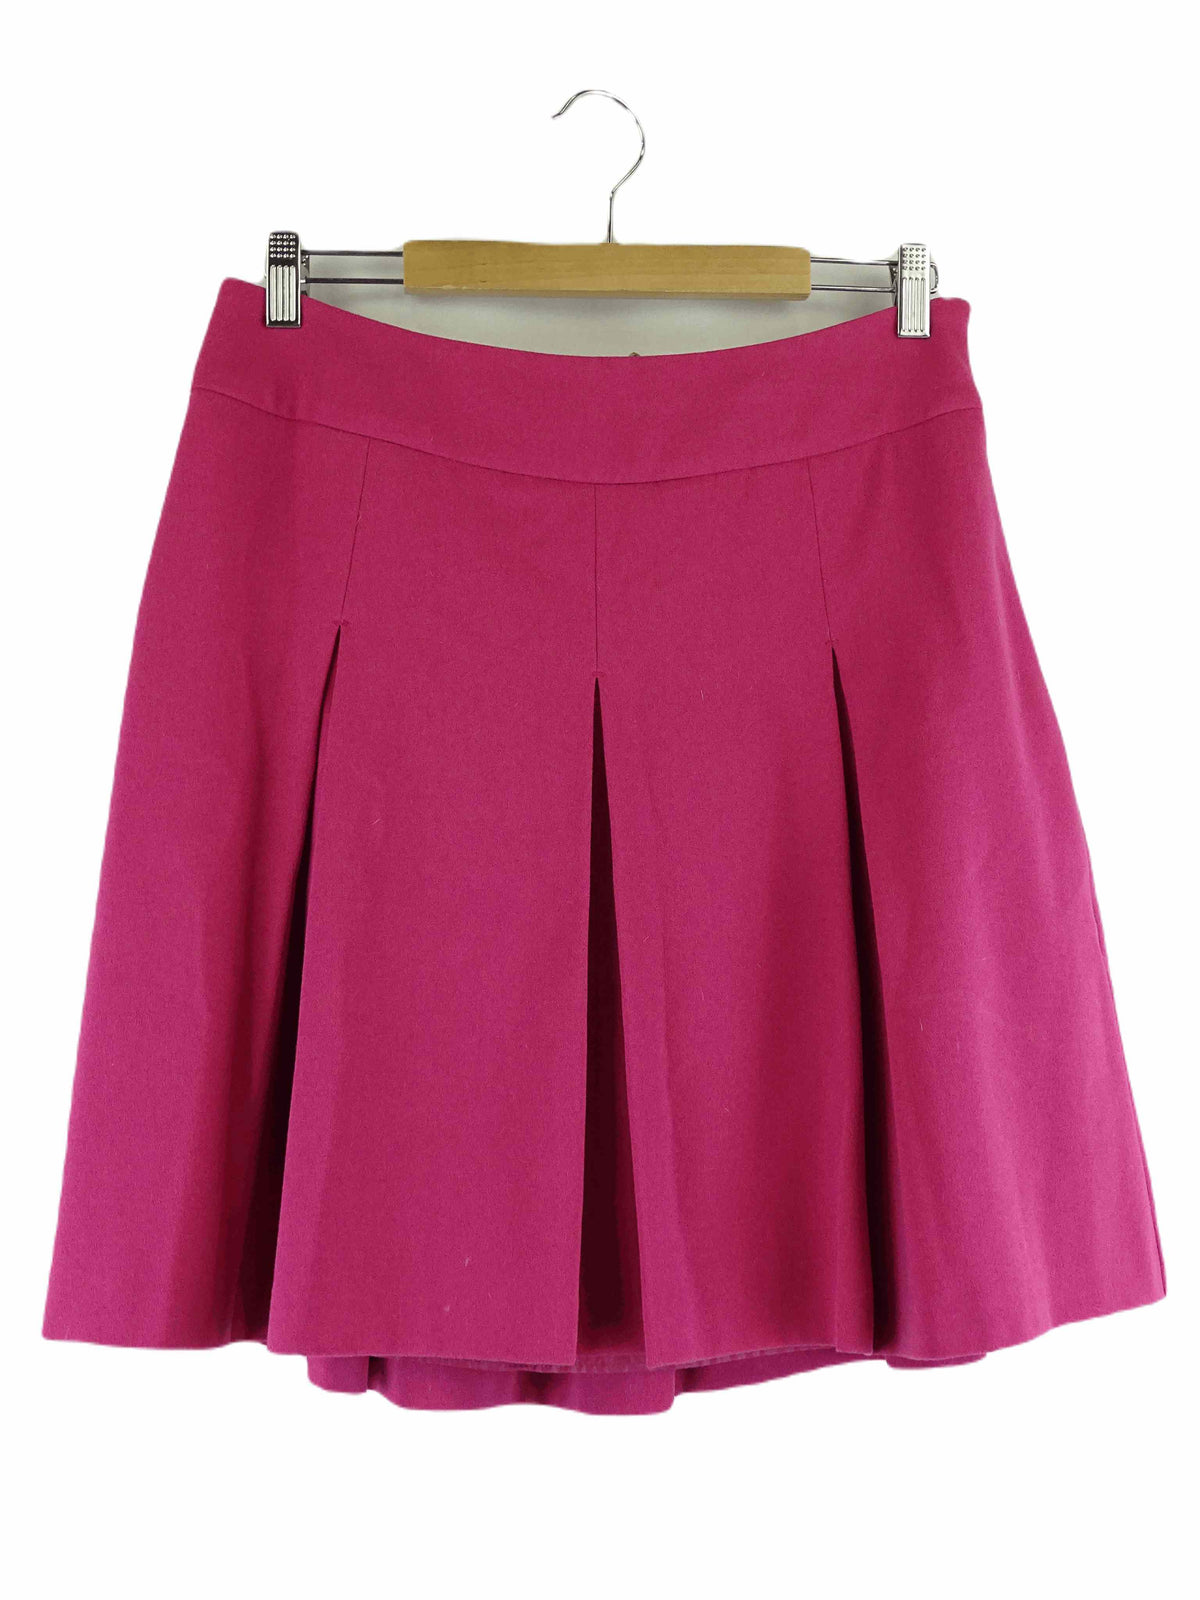 Next Pink Pleated Skirt 12